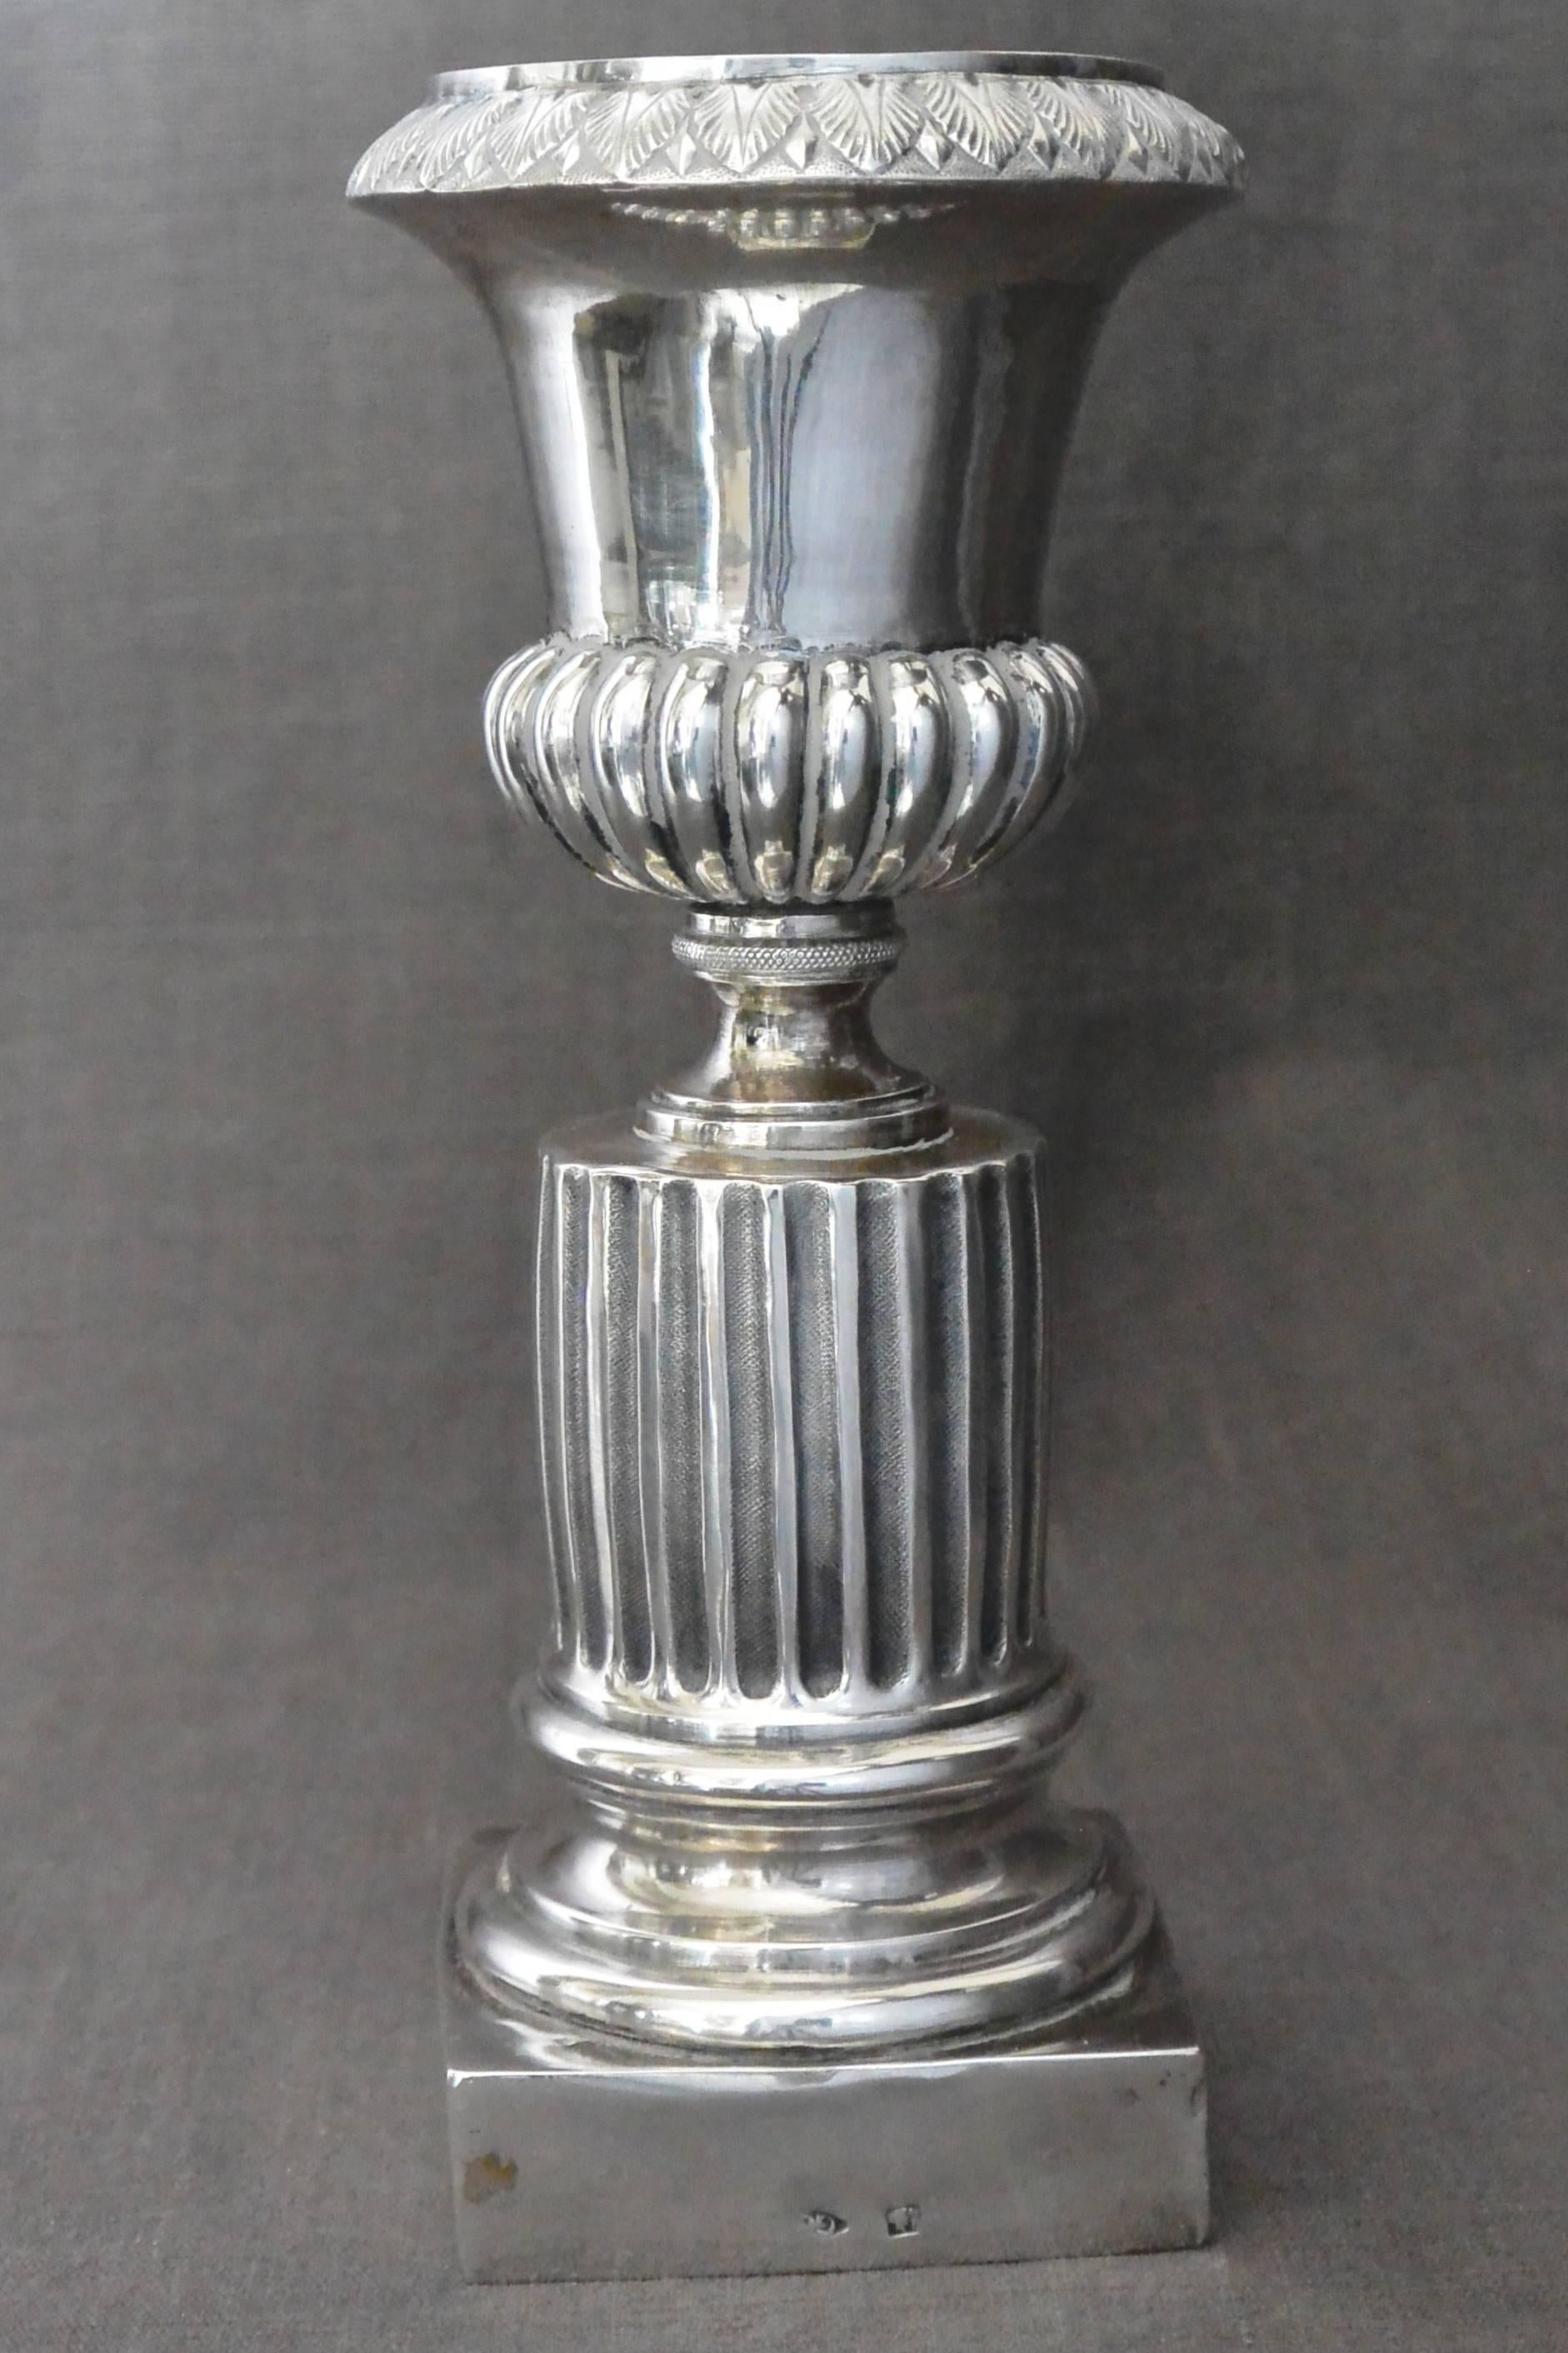 Italian Neoclassical Silver Vase. Neapolitan sterling silver acanthus leaf-topped urn on fluted column pedestal with Italian sterling hallmarks, stamped N8, Italy, circa 1870.
Dimension: 2.25